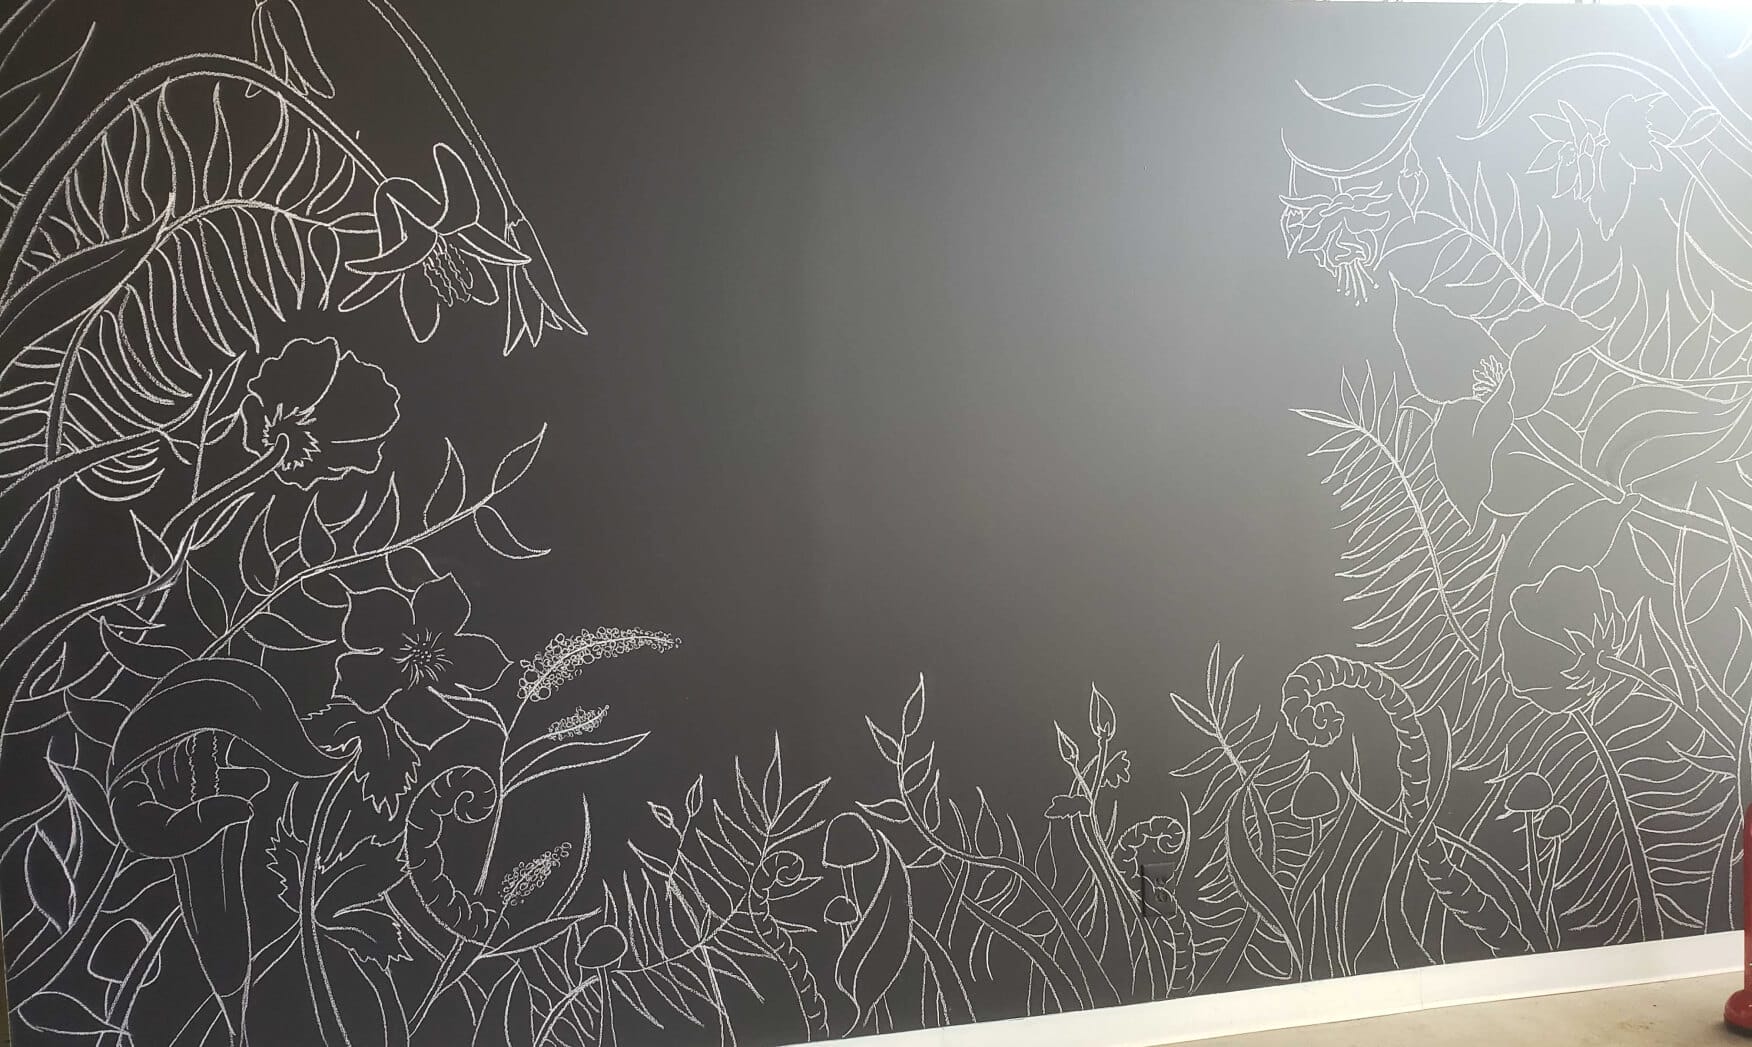 Chalk sketched mural on a black wall in Perfect Afternoon's office space in Pleasant Ridge, Michigan